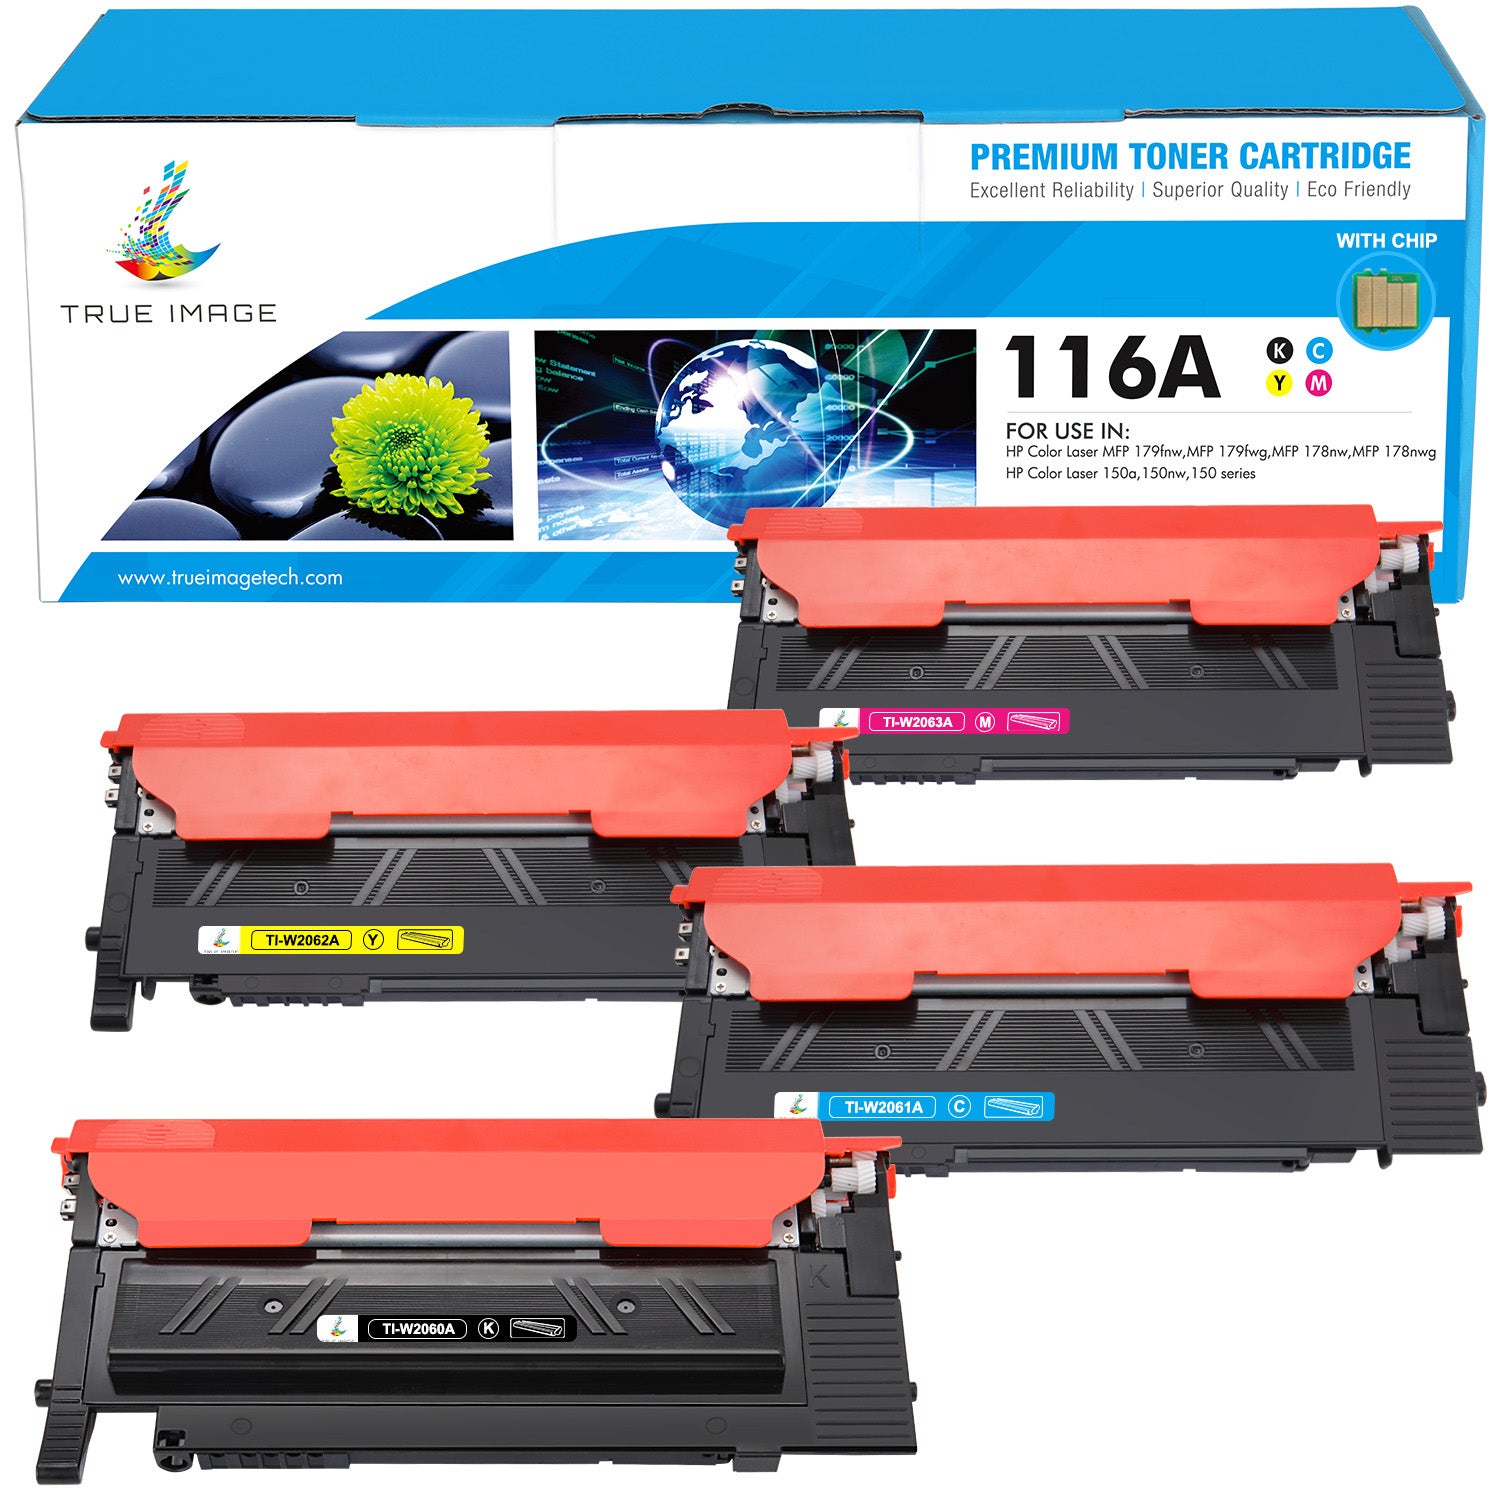 116A Toner Cartridges With Chip Compatible for HP 116A W2060A Color  LaserJet MFP 179Fnw 178nw 179fwg 178nwg 150a 150nw 150 Series Printer Ink  (Black Cyan Magenta Yellow 5-Pack) 